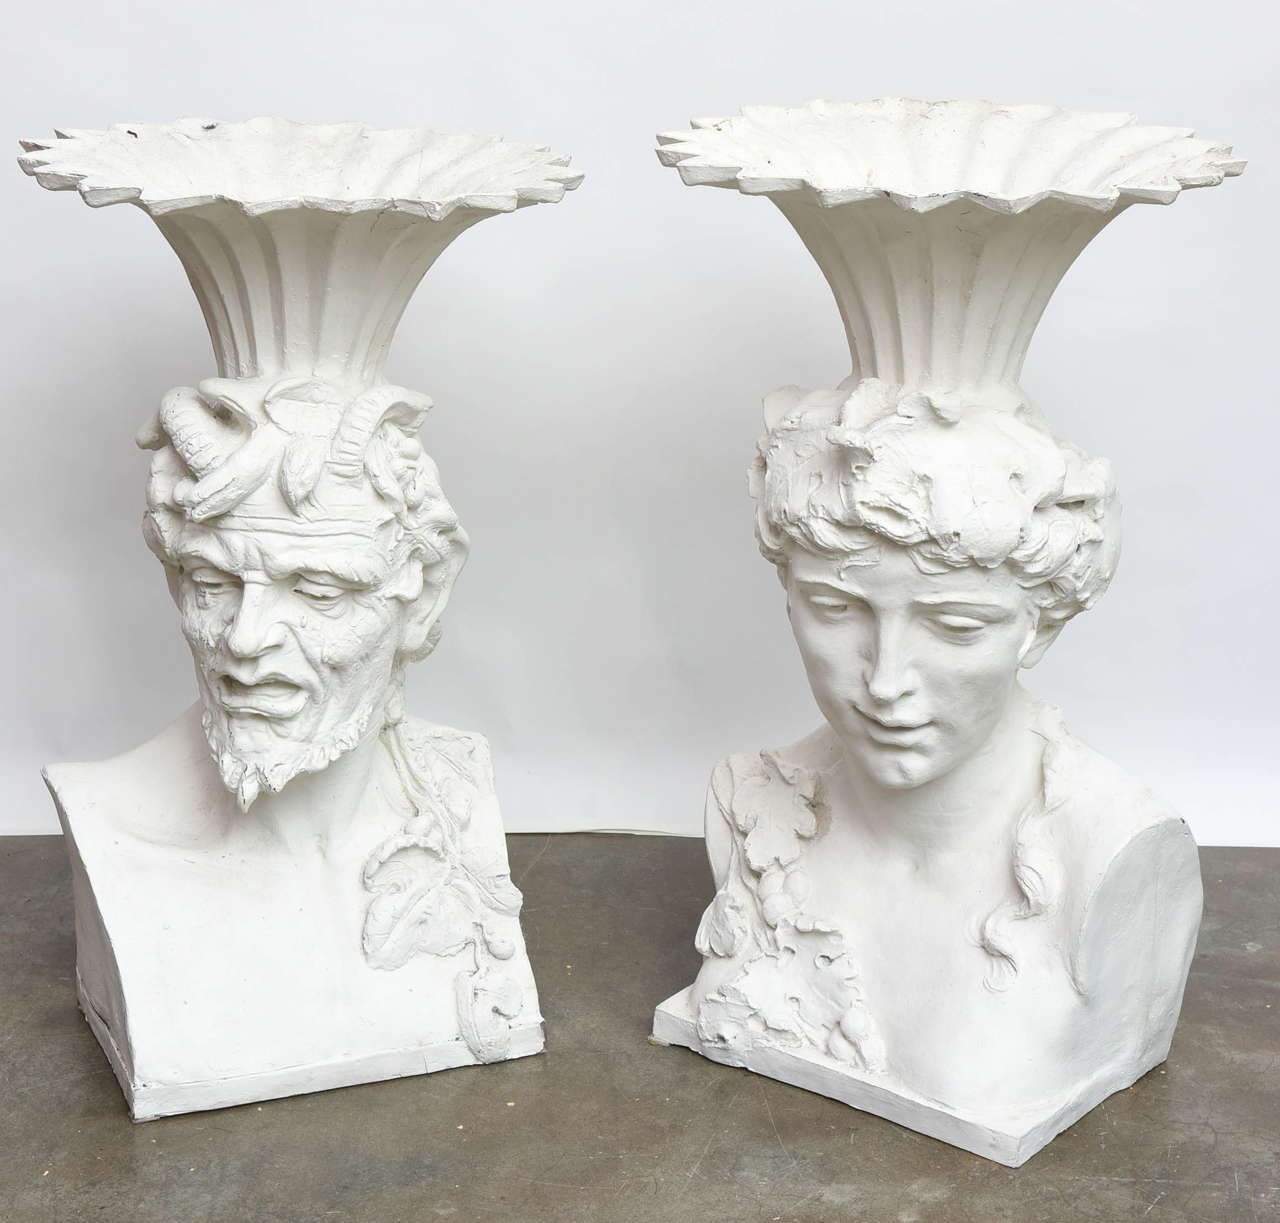 Incredible pair of giant planters in the likeness of Bacchus and his muse. Made of painted fiberglass to resemble concrete.